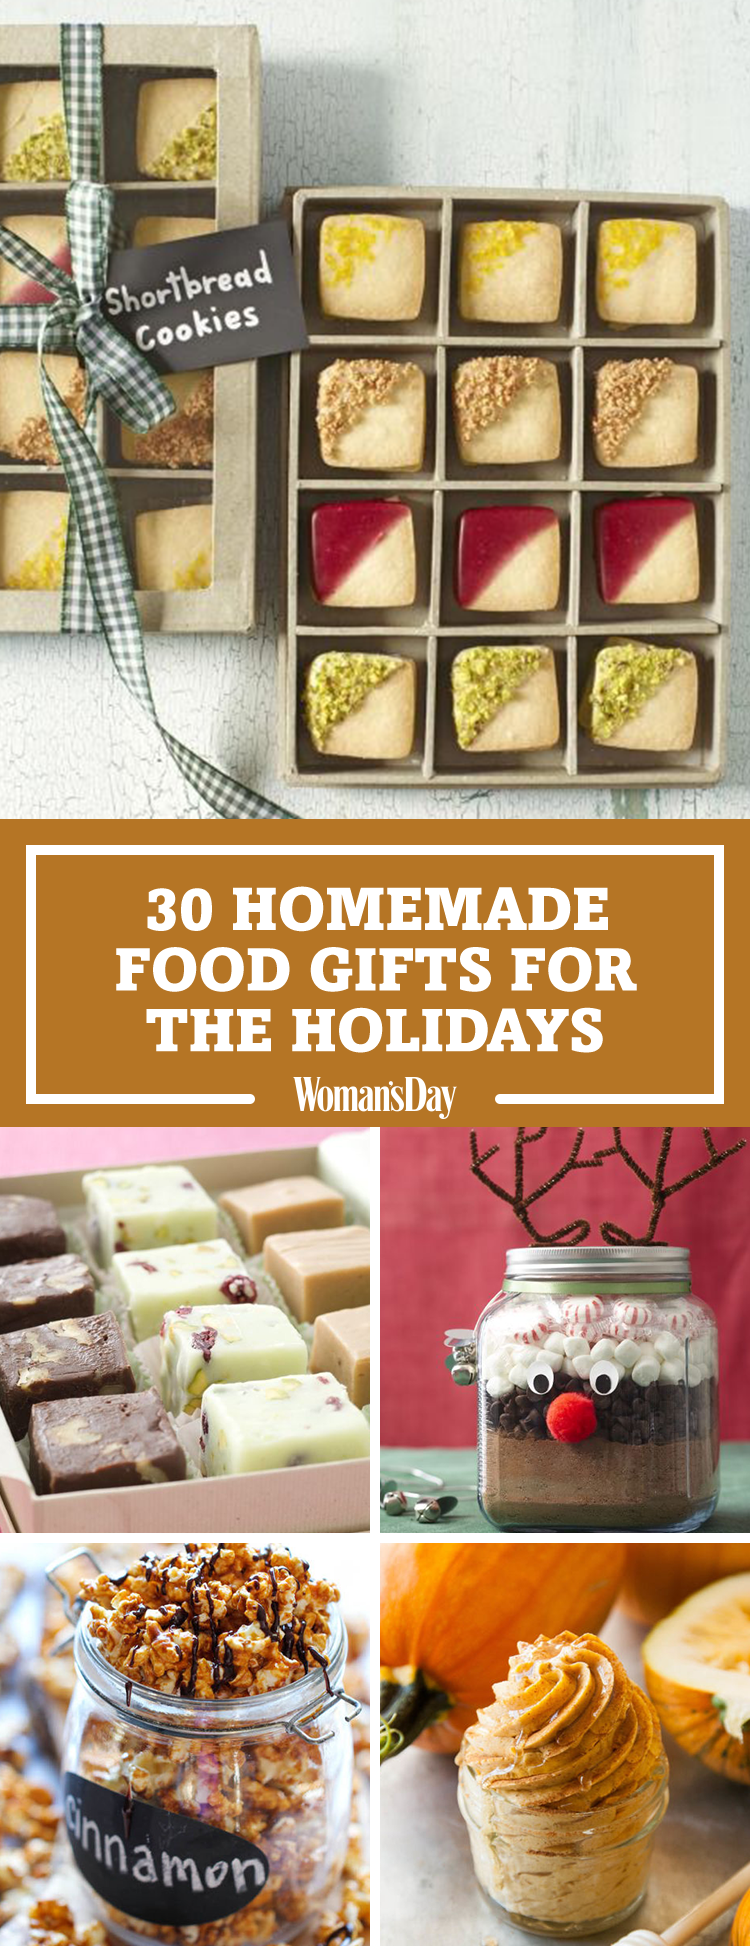 39 Homemade Food Gifts You Can Make At the Last Minute - 39 Homemade Food Gifts You Can Make At the Last Minute -   18 diy Gifts food ideas